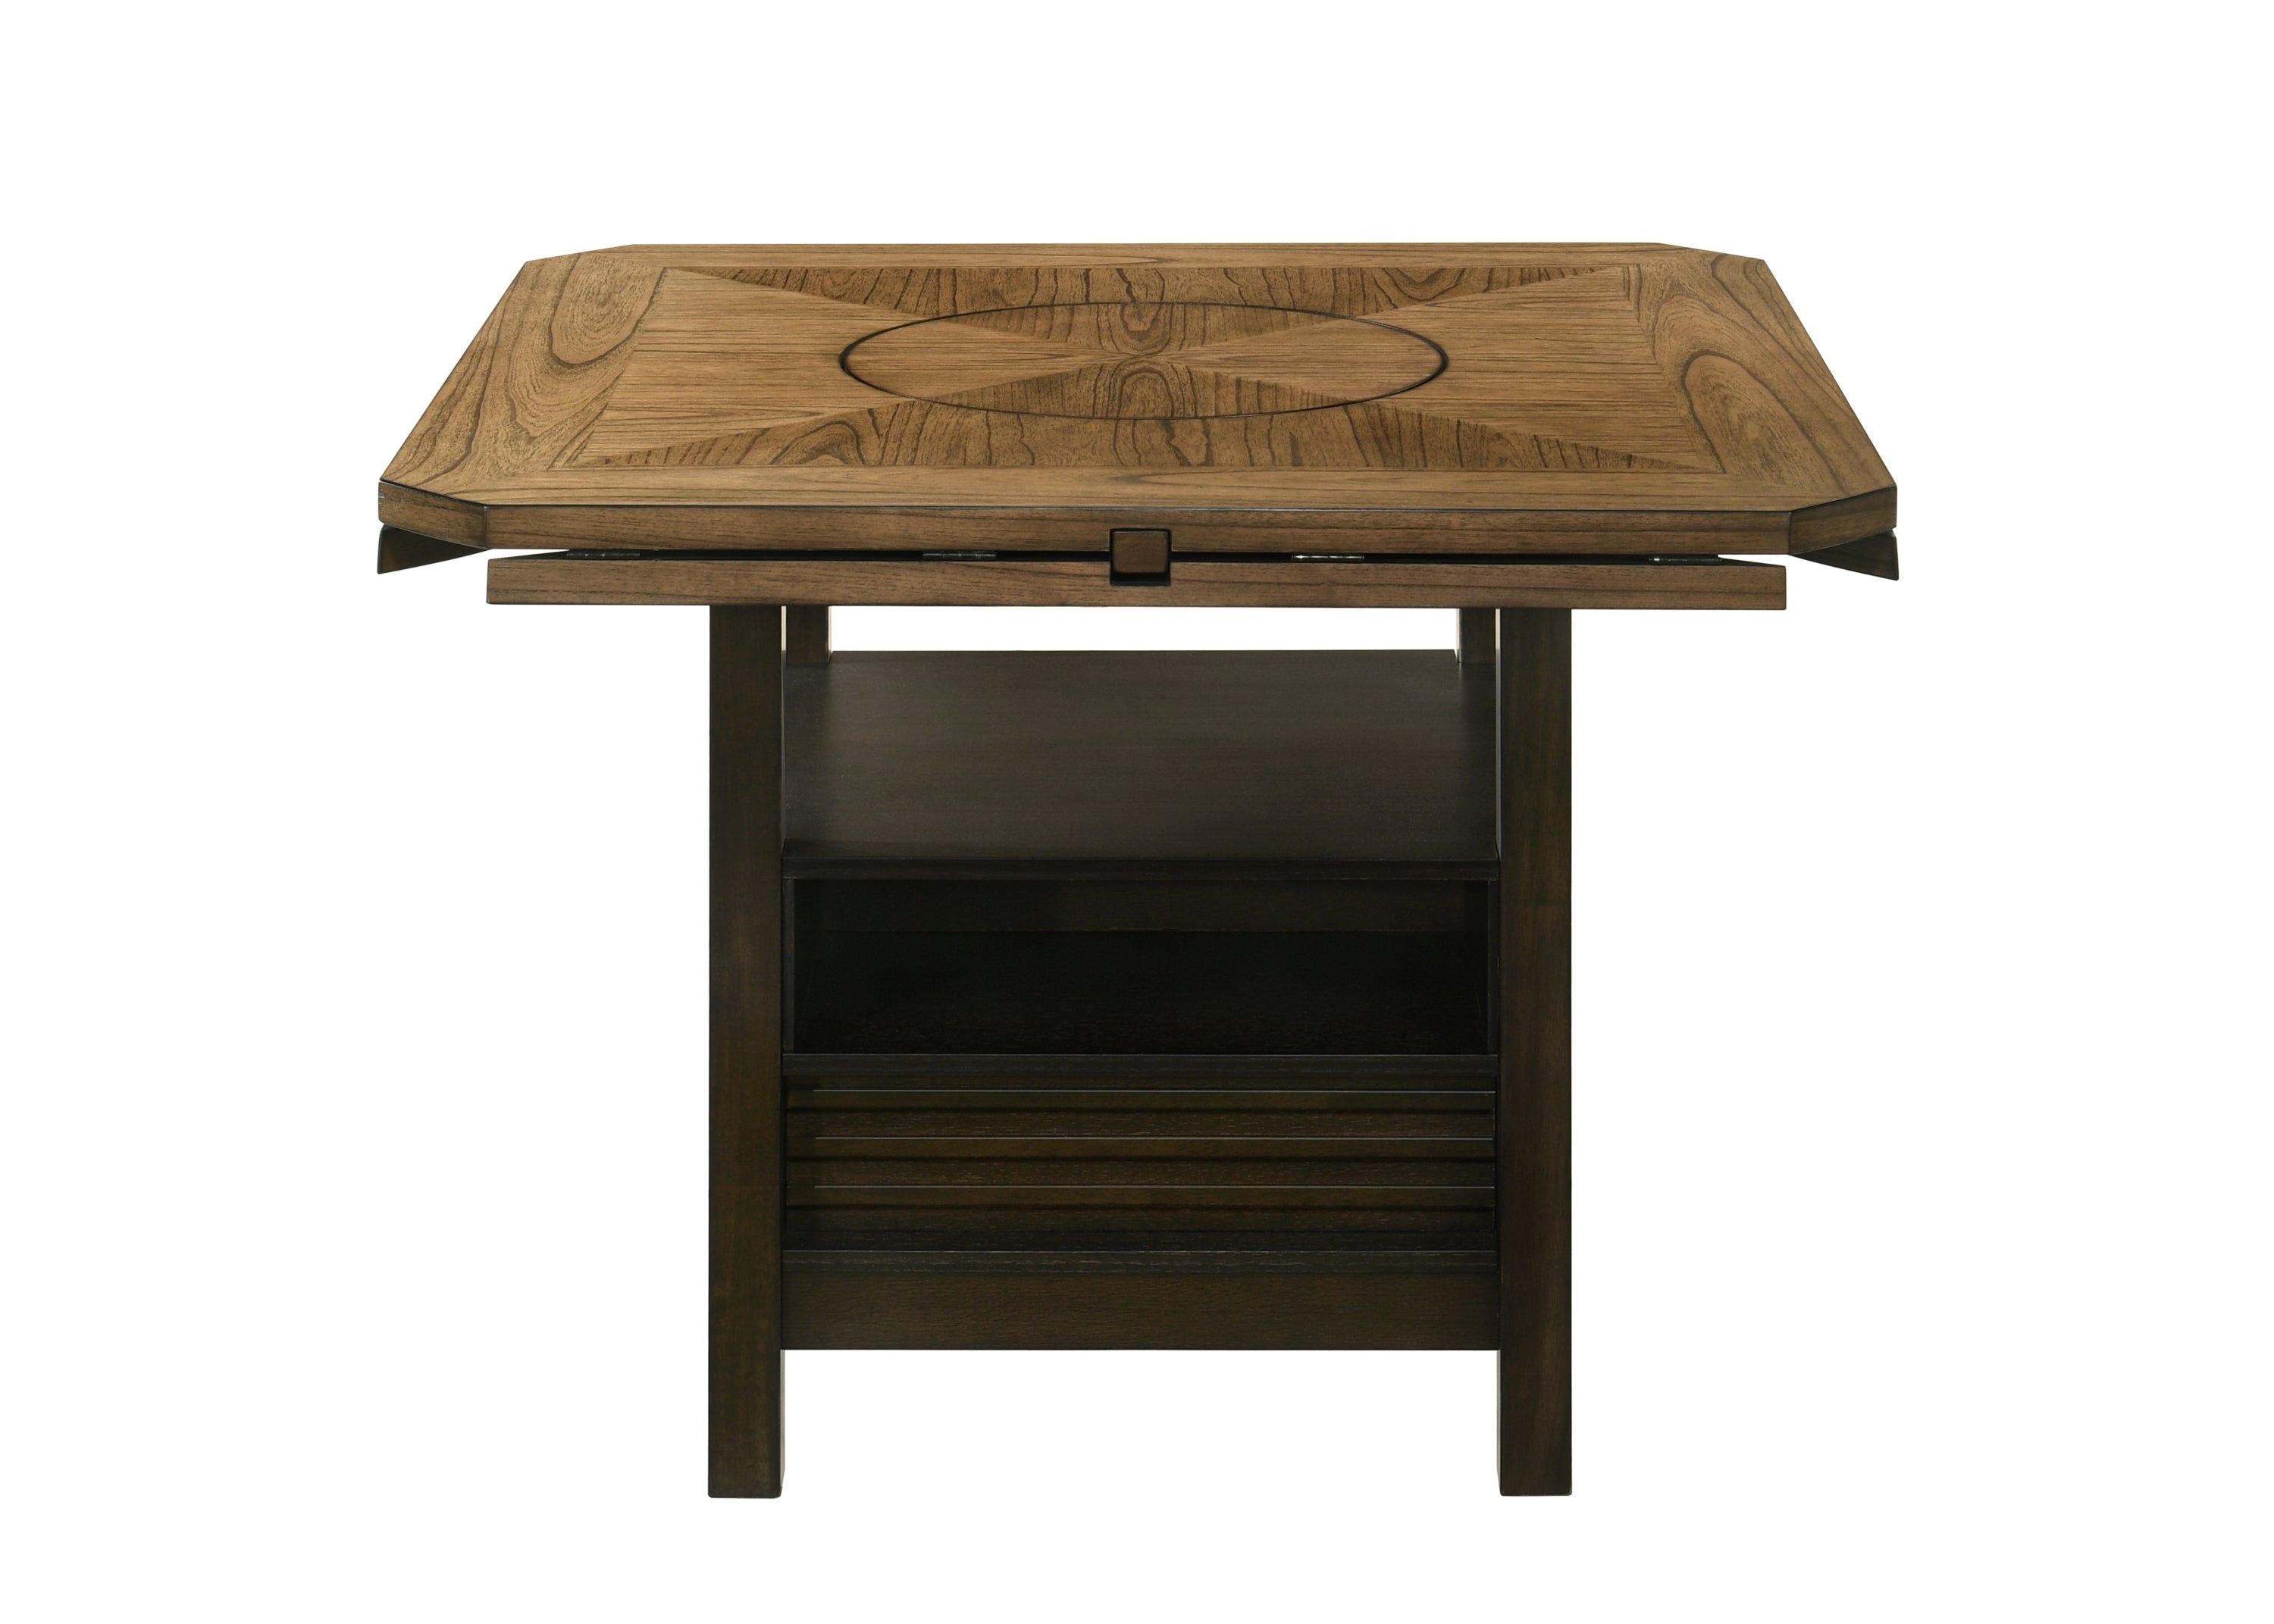 Oakly Brown Round/Square Counter Height Table - SET | 2848T-6060-TOP | 2848T-6060-LEG - Bien Home Furniture &amp; Electronics